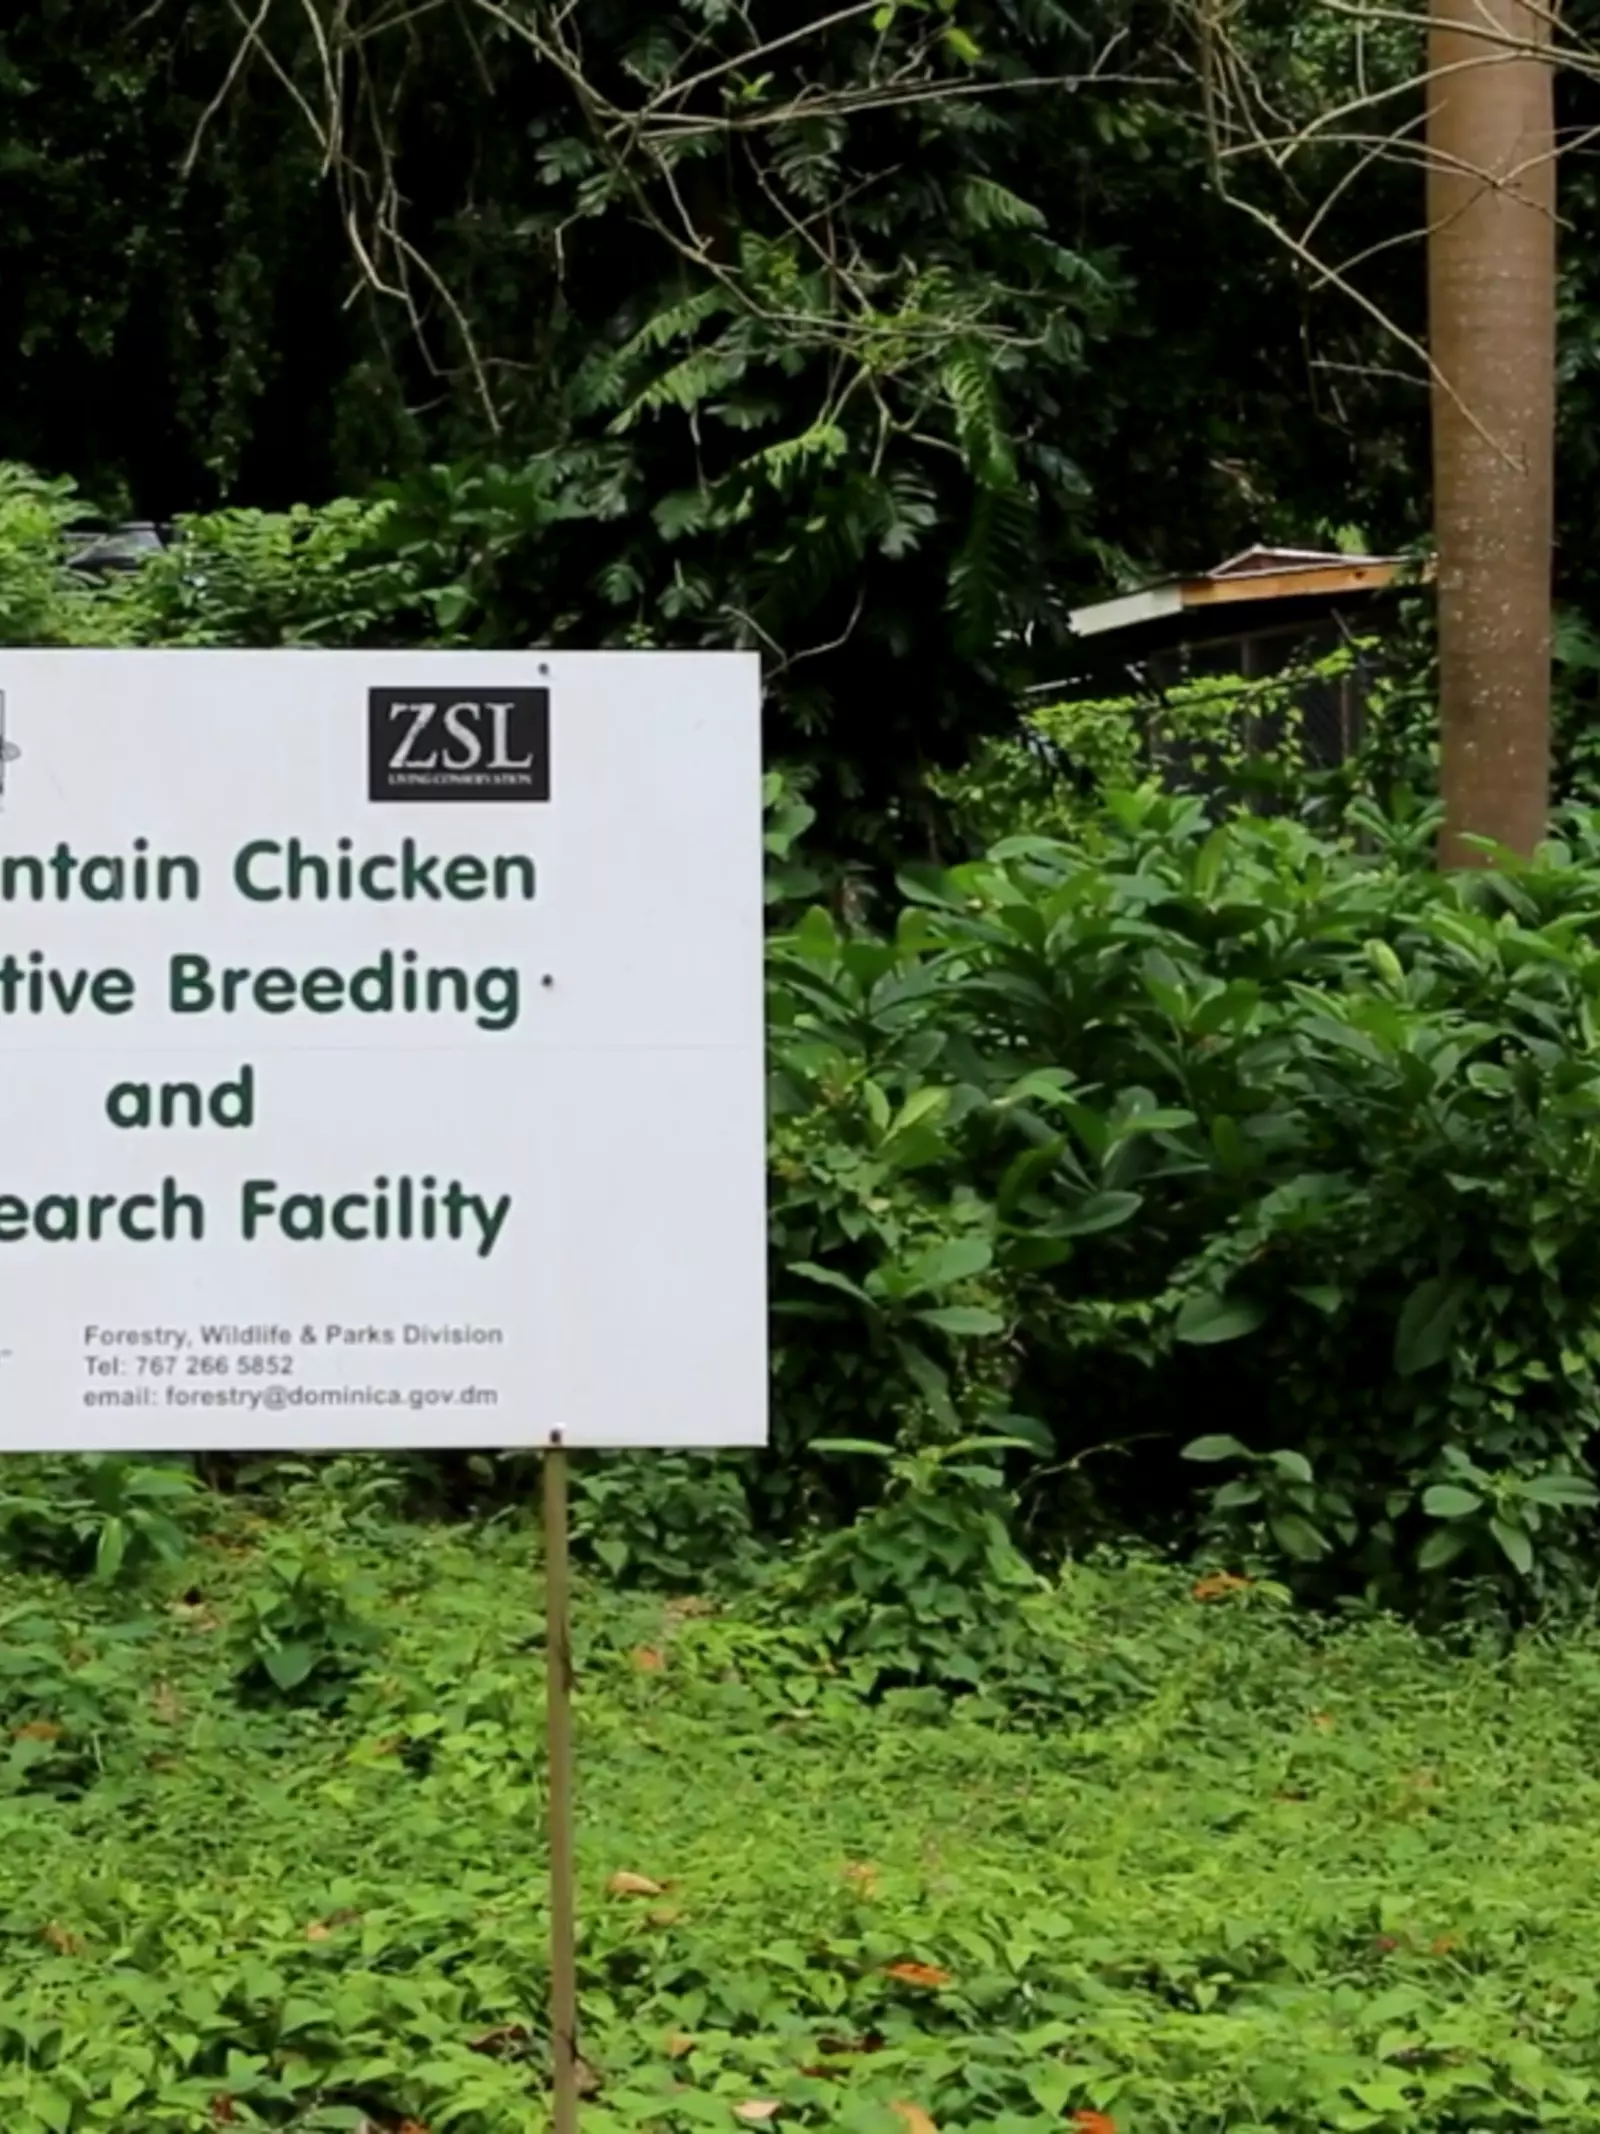 Mountain chicken breeding facility in Dominica supported by ZSL